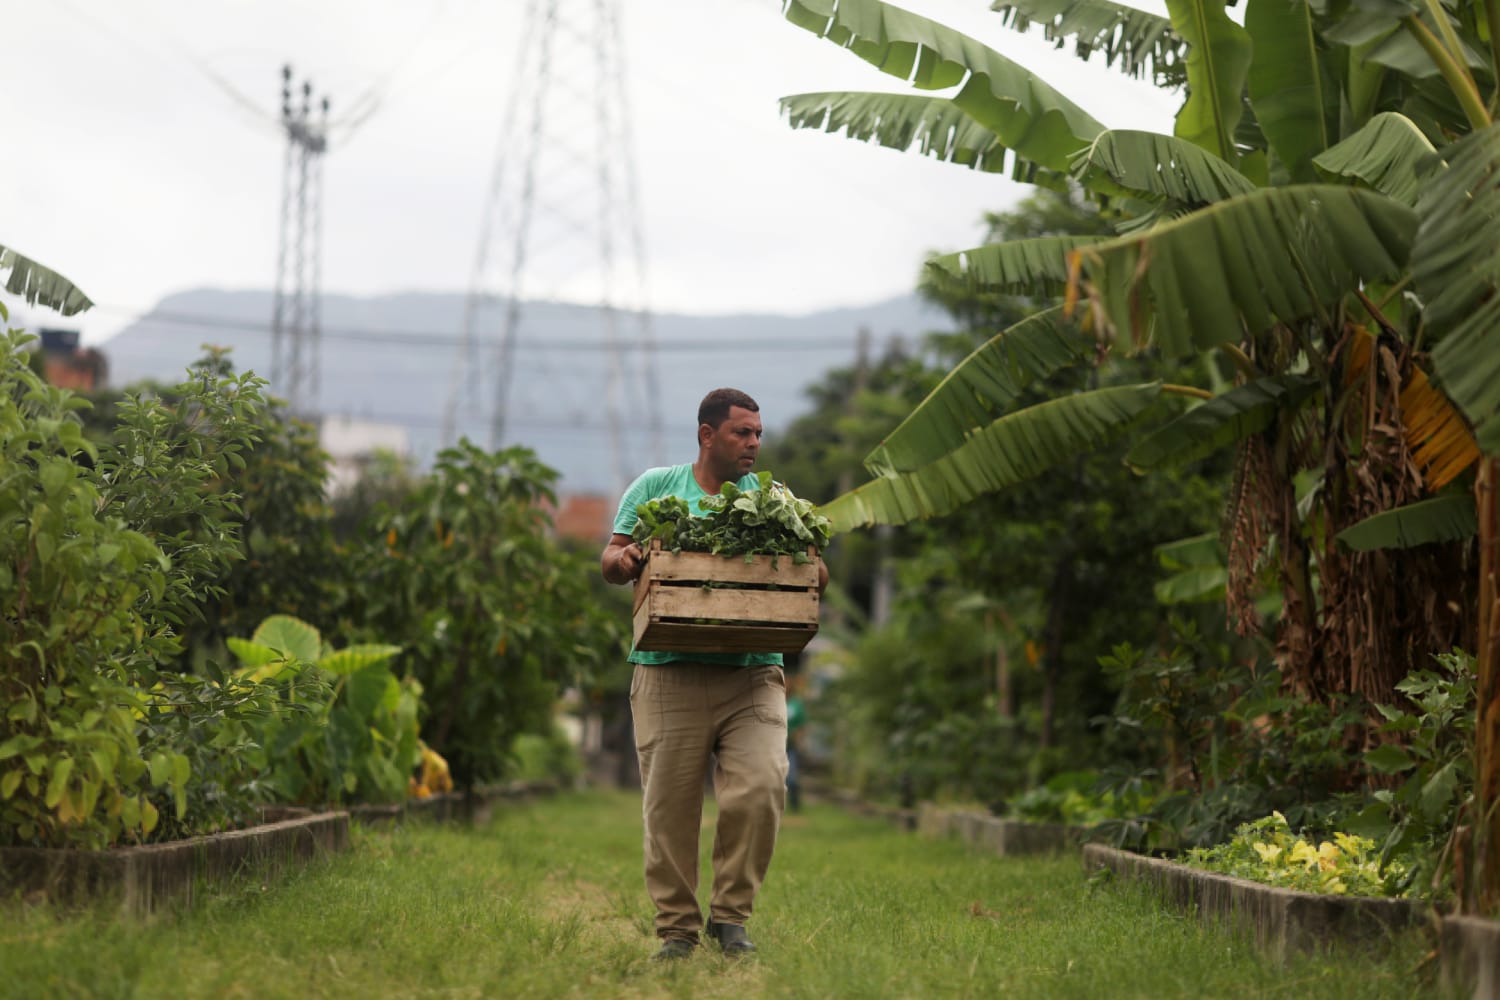 A huge lot used to smoke crack is now Latin America’s largest urban garden